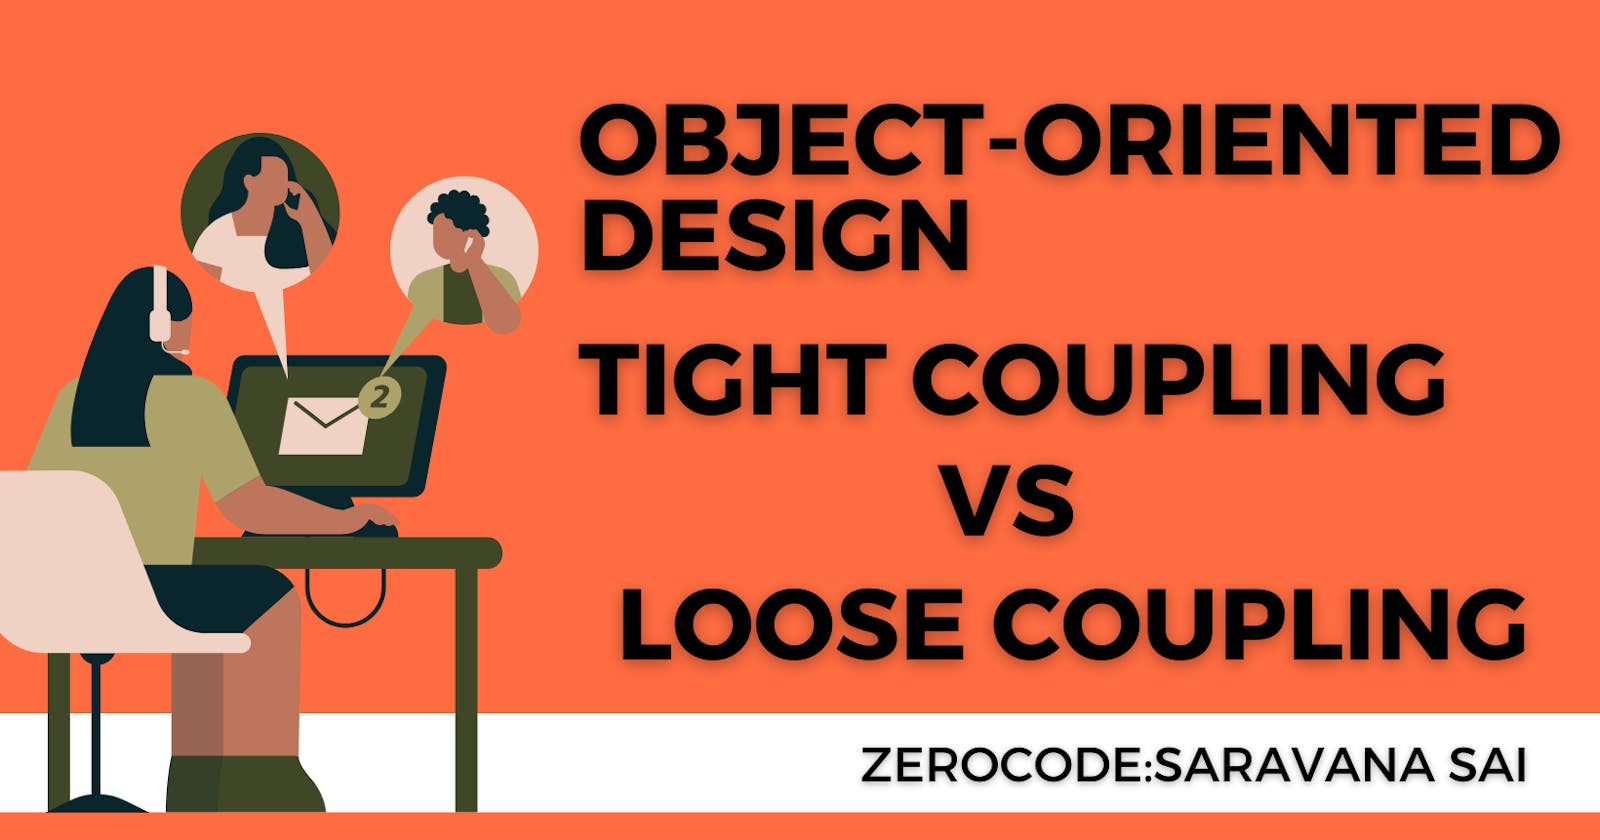 Loose coupling vs Tight coupling in the object-oriented design